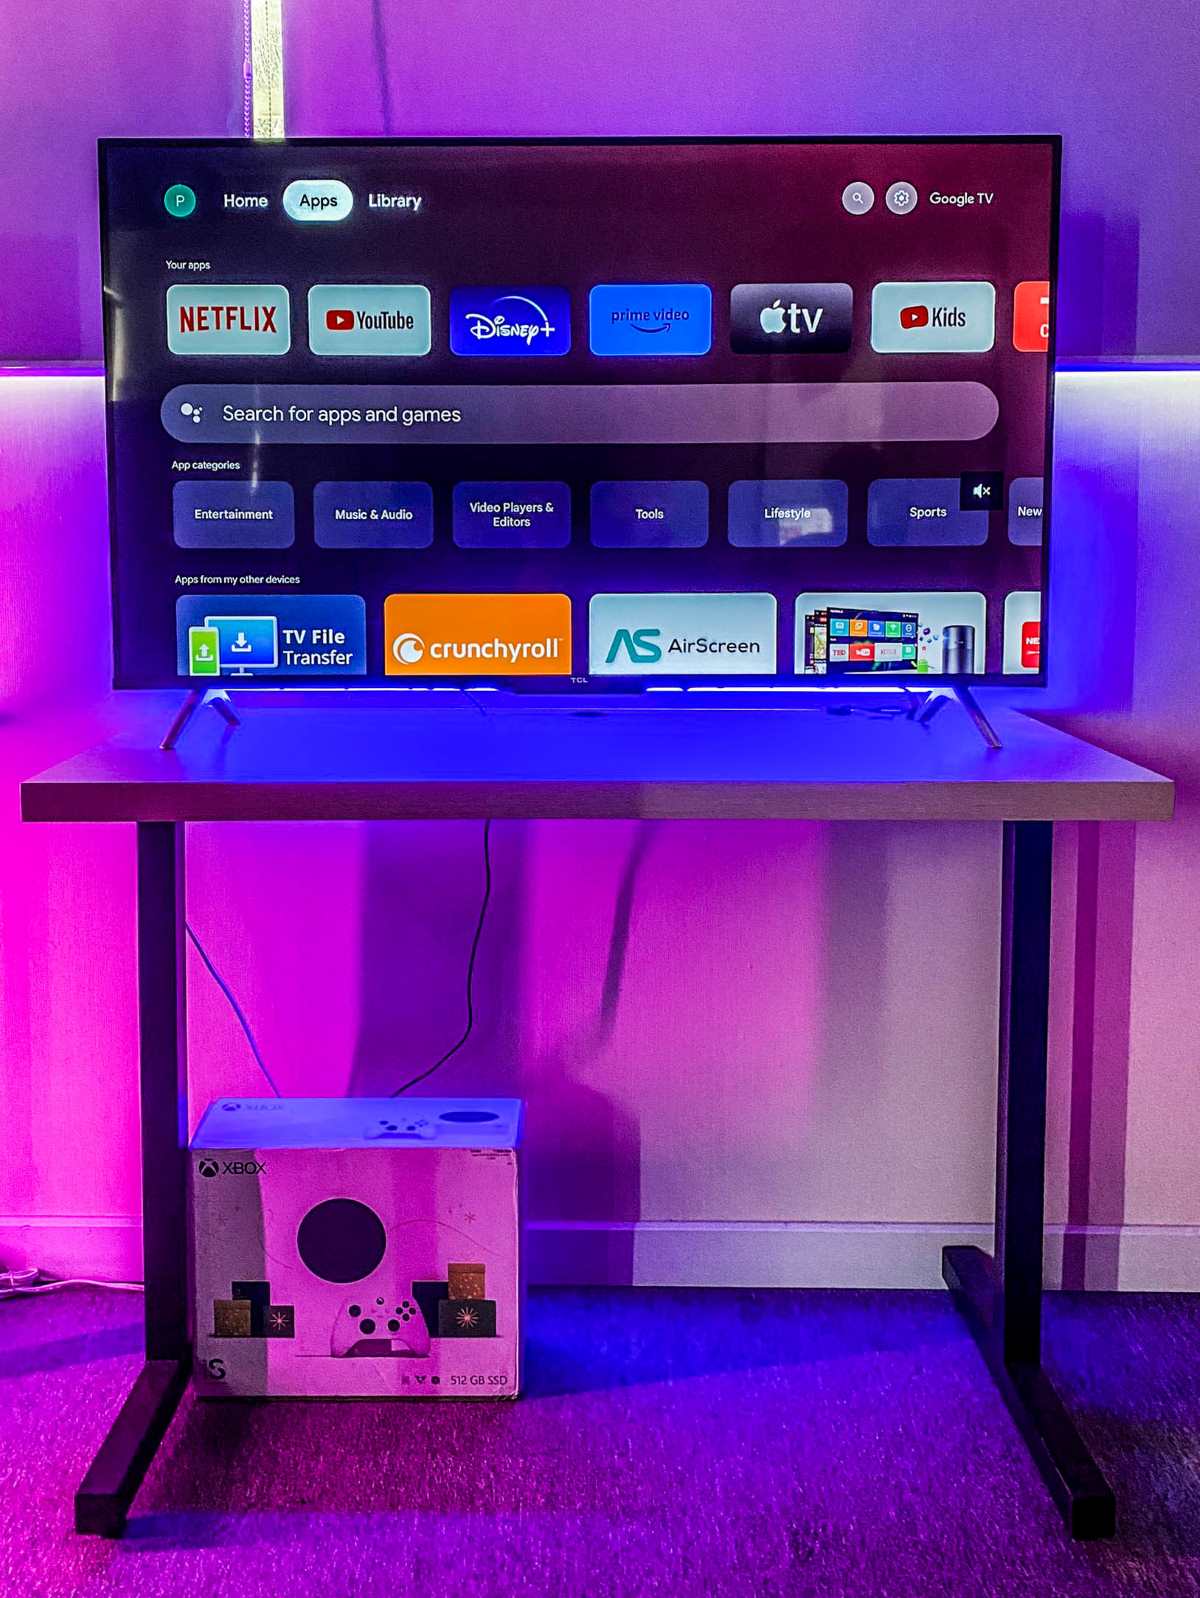 the TCL Google TV is placed on a high-leg table